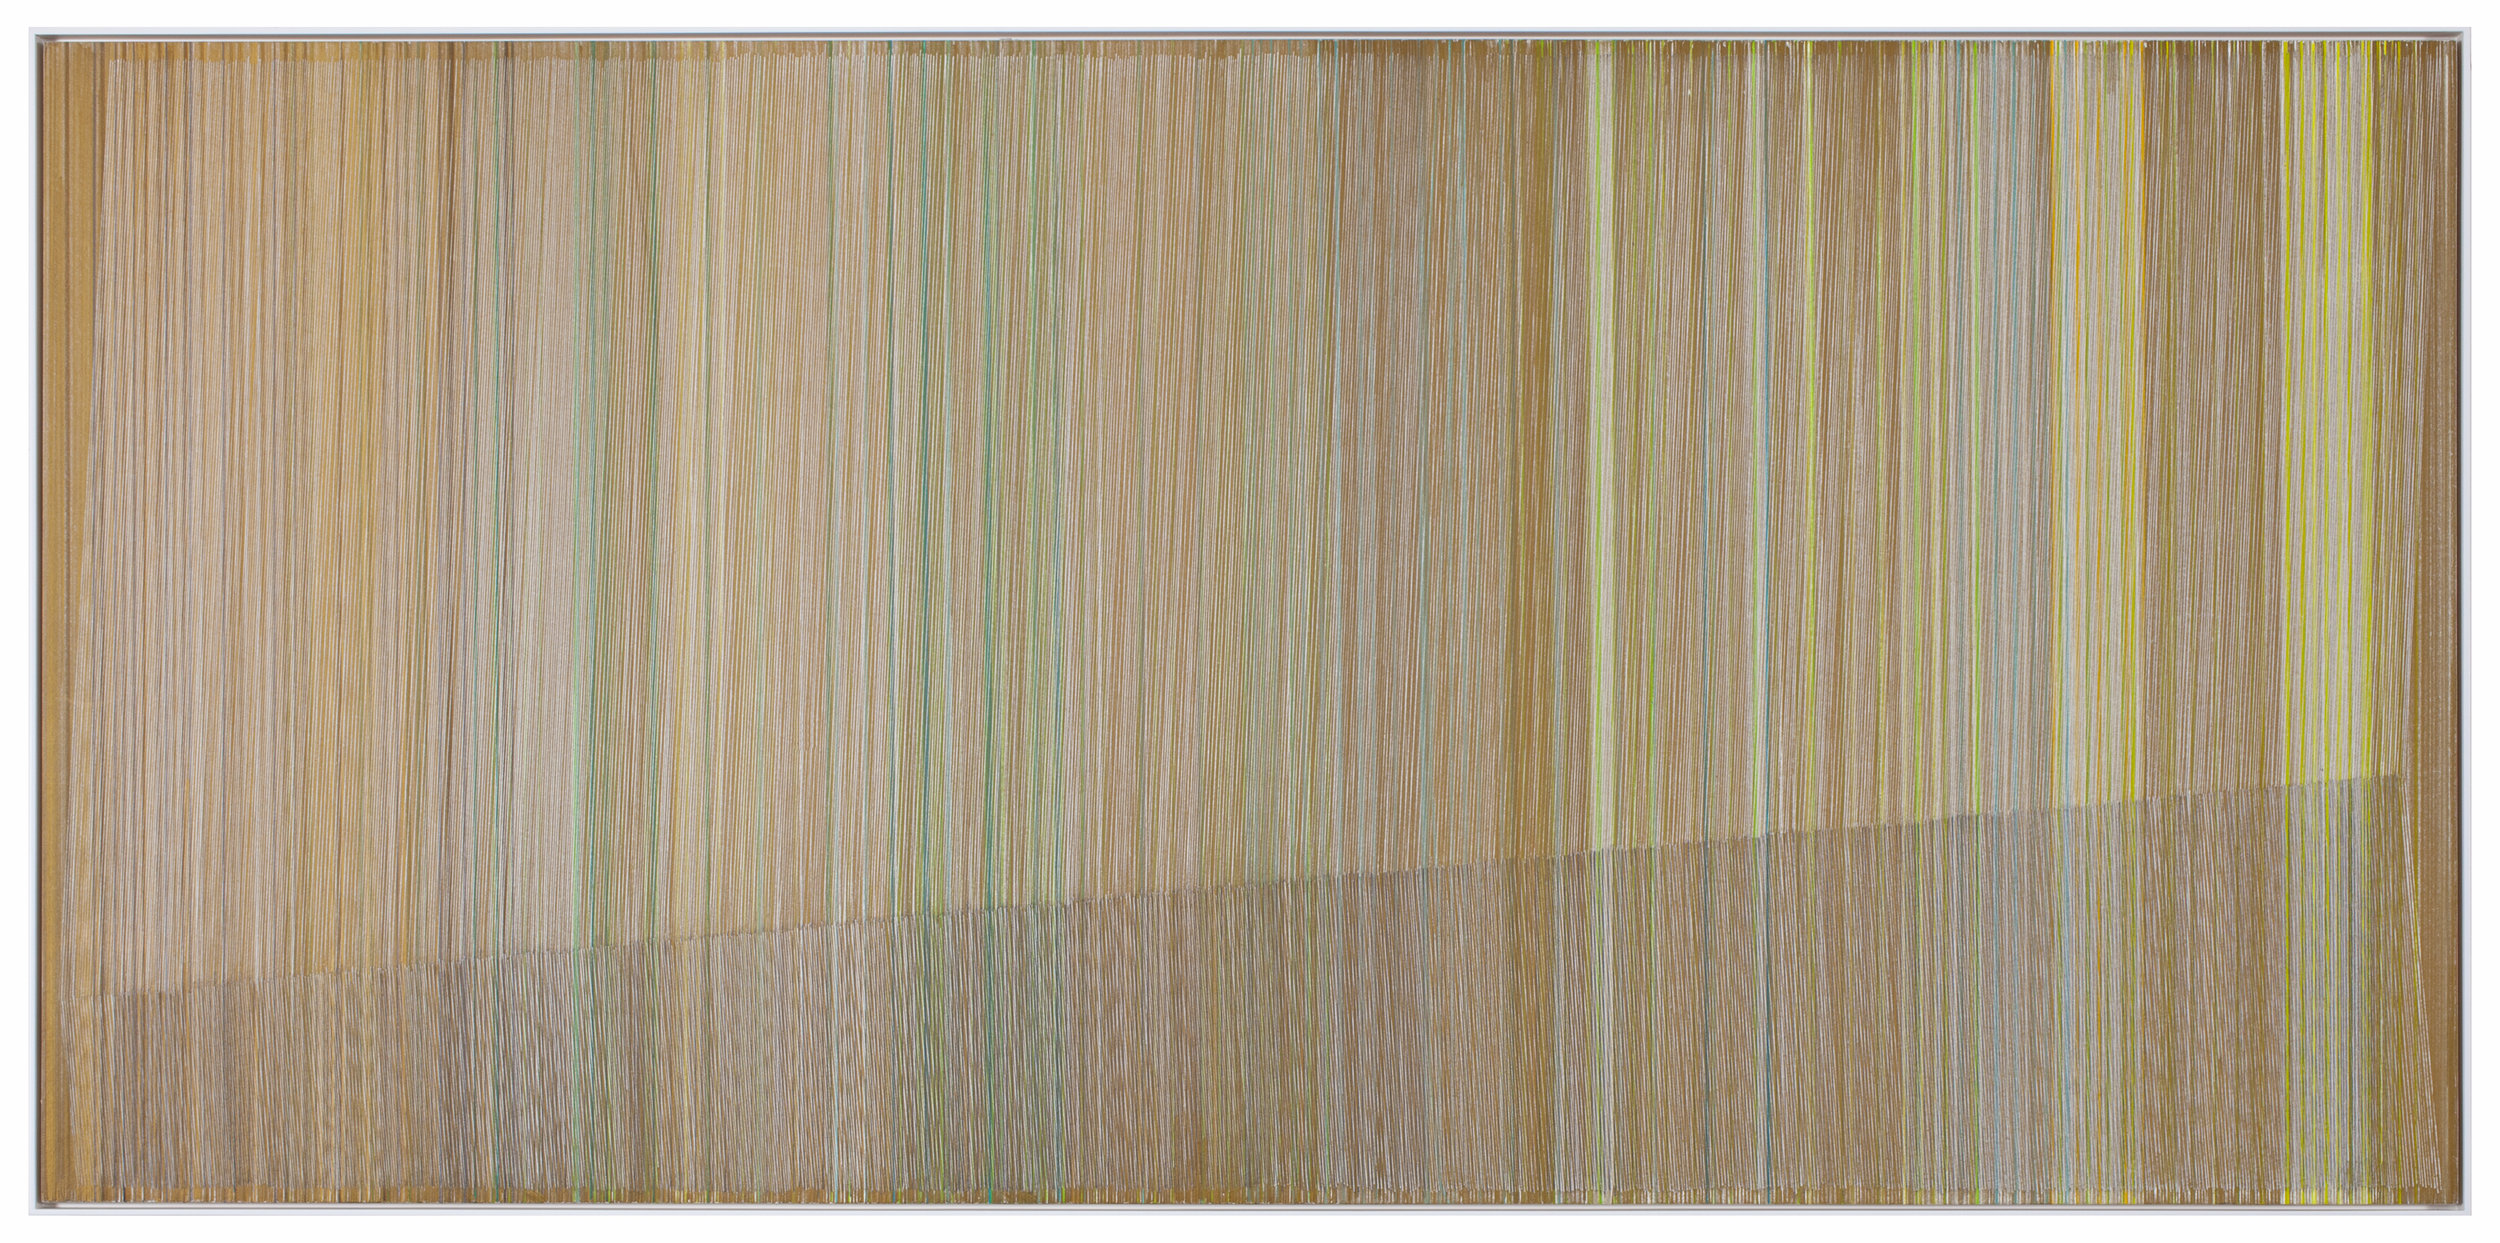    soil line   2016 graphite and colored pencil on mat board 24 x 40 inches 